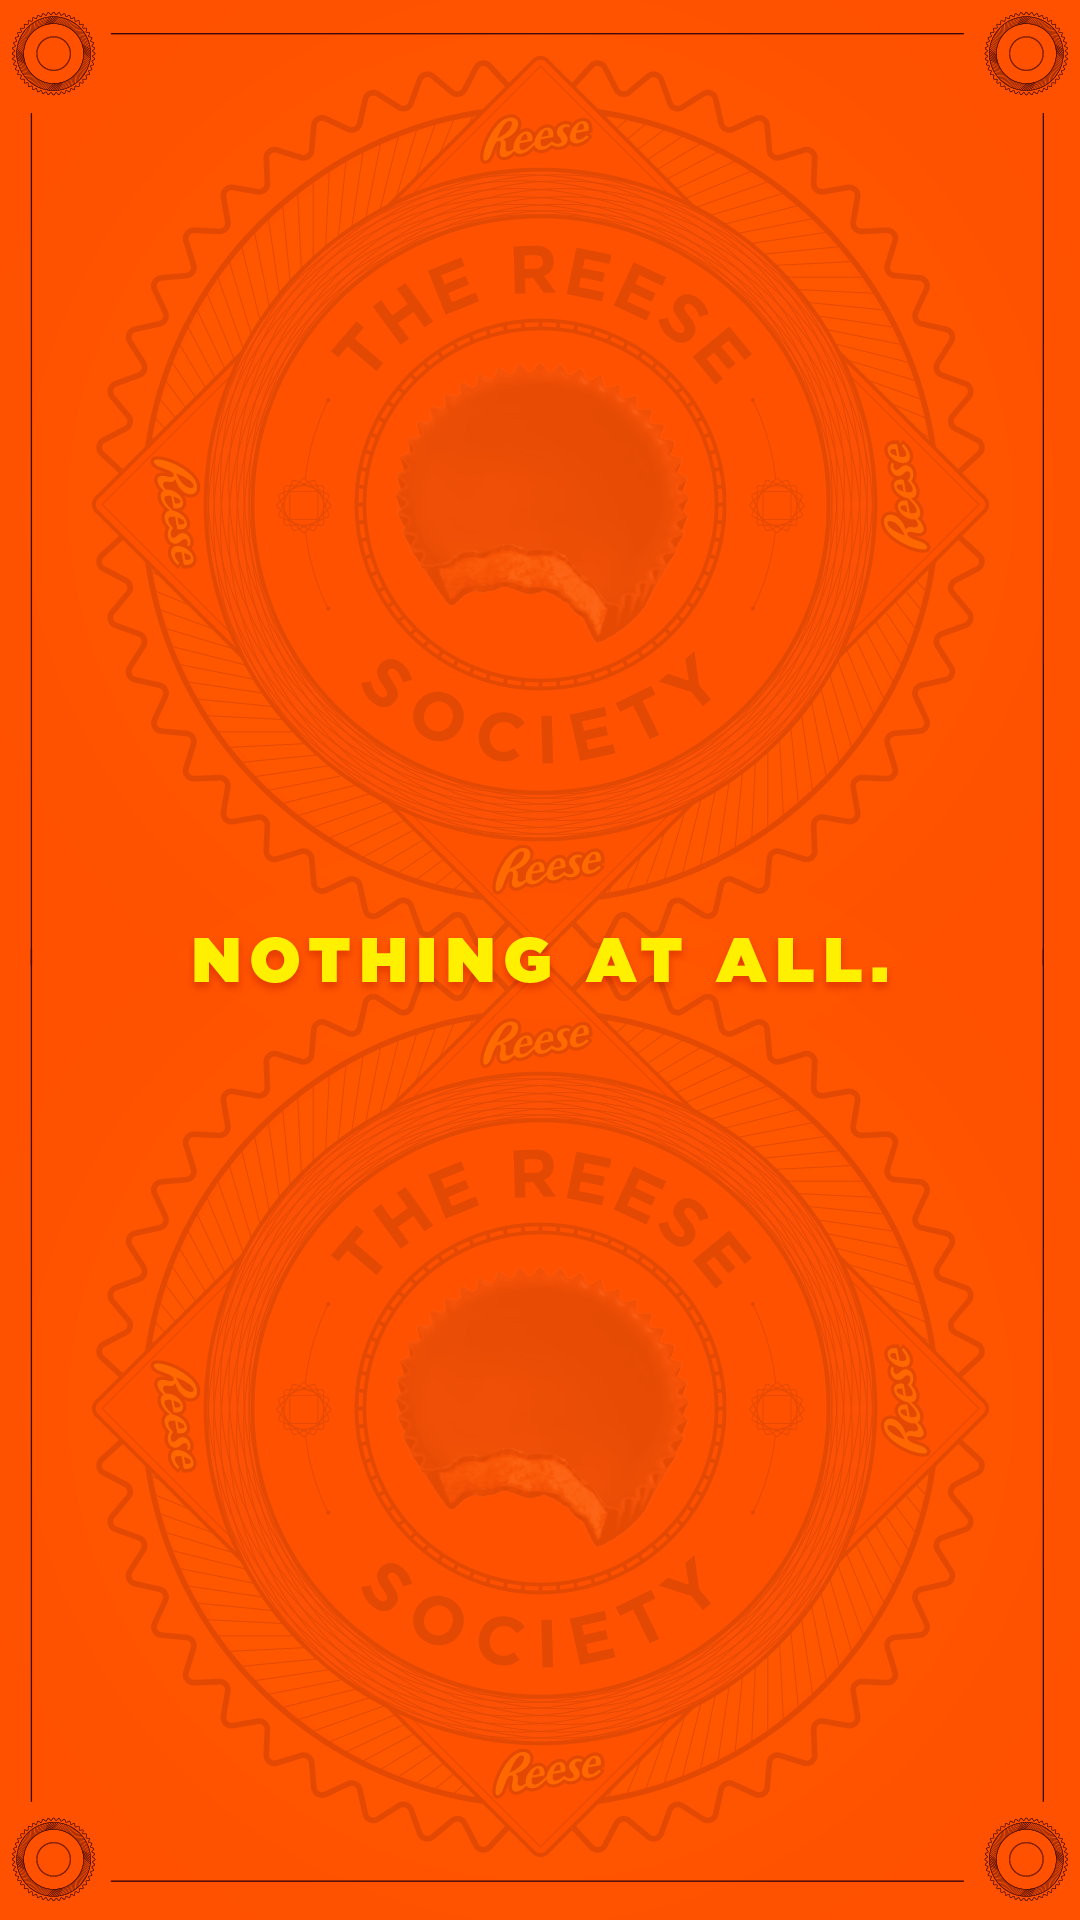 Reese-Society-IG_0031_Nothing-at-all.png